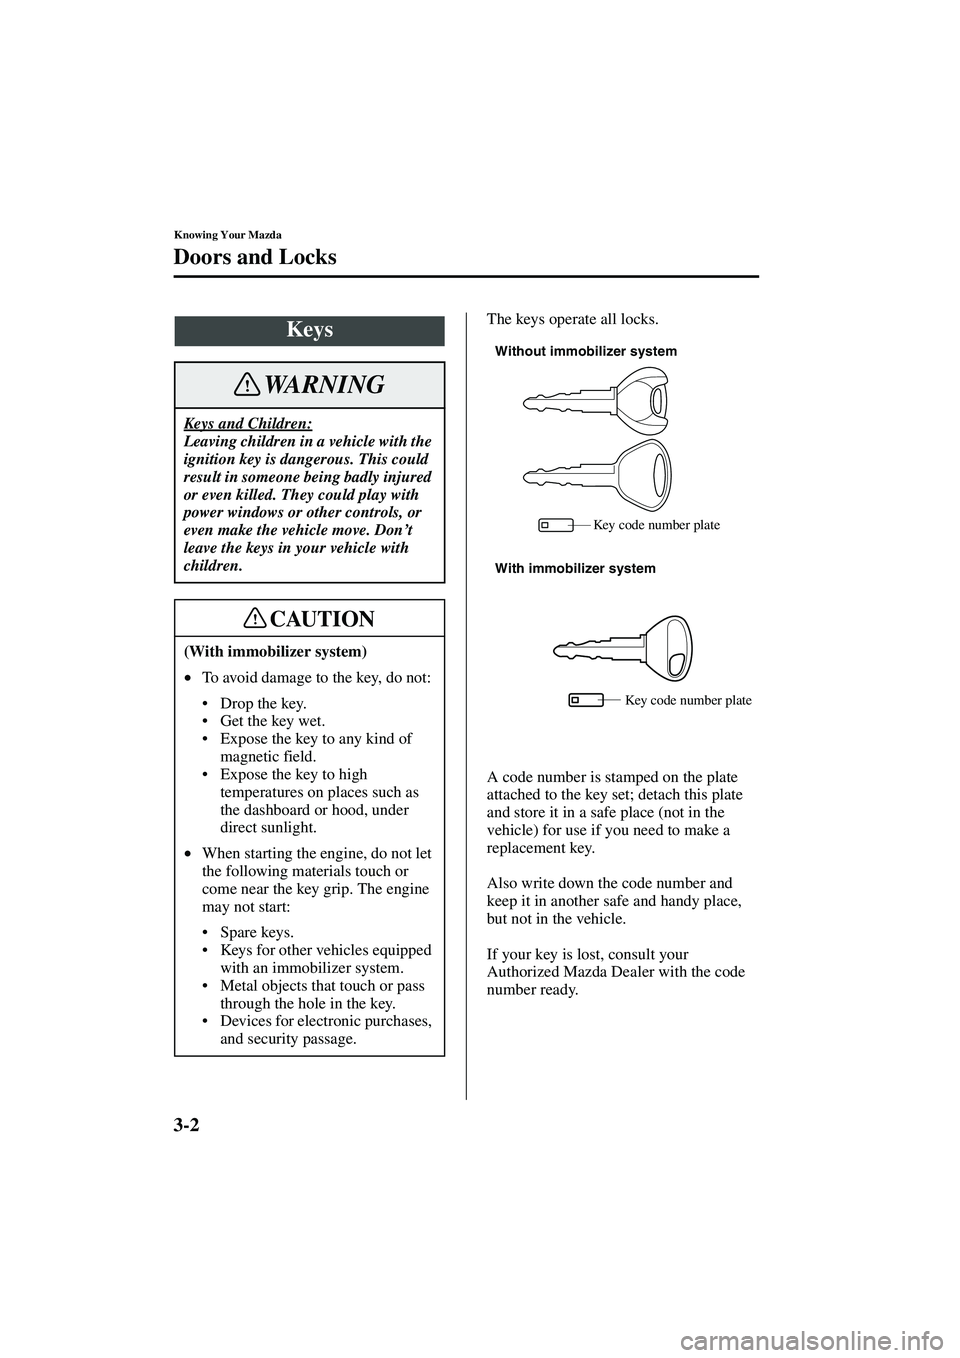 MAZDA MODEL MX-5 MIATA 2003  Owners Manual 3-2
Knowing Your Mazda
Form No. 8R09-EA-02G
Doors and Locks
The keys operate all locks.
A code number is stamped on the plate 
attached to the key set; detach this plate 
and store it in a safe place 